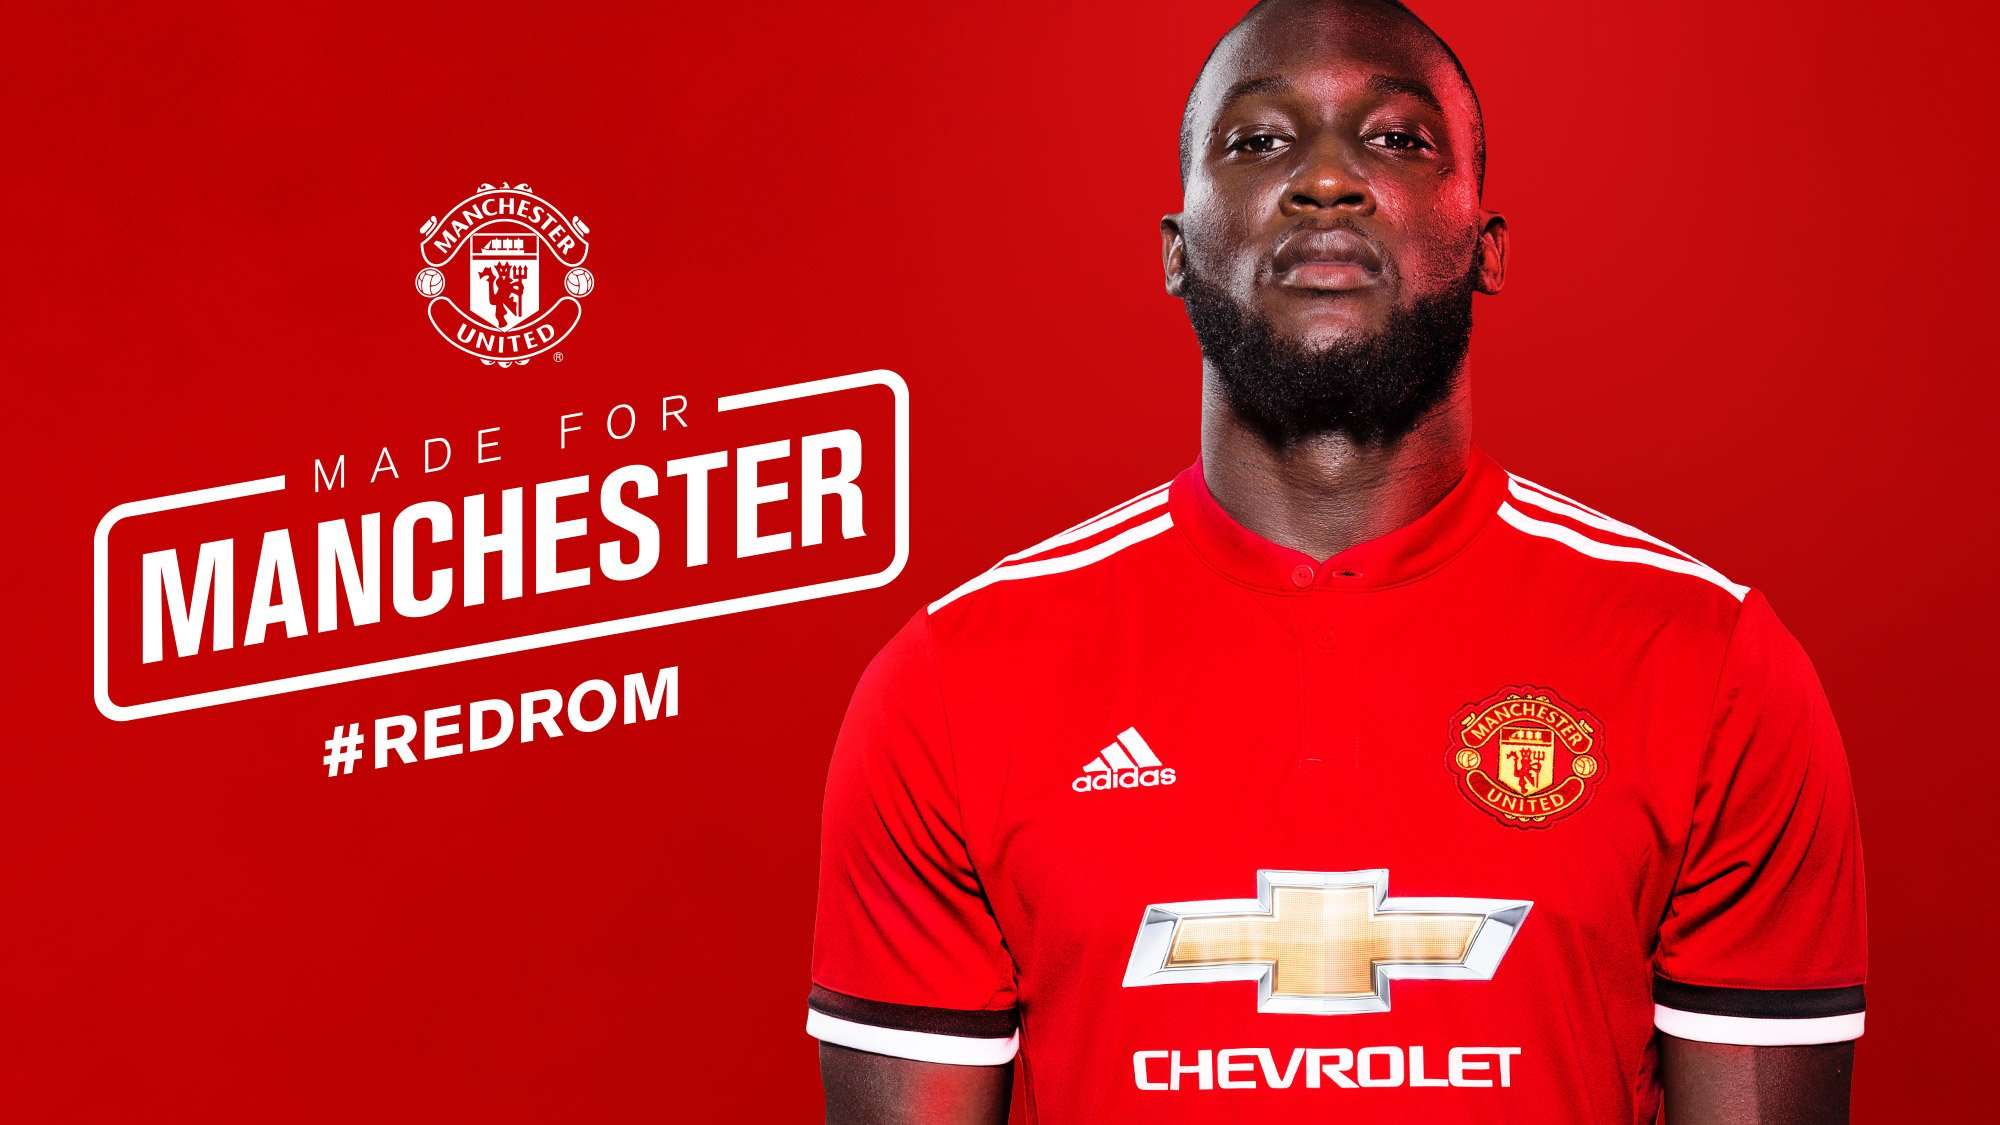 image for Manchester United confirm Lukaku signing